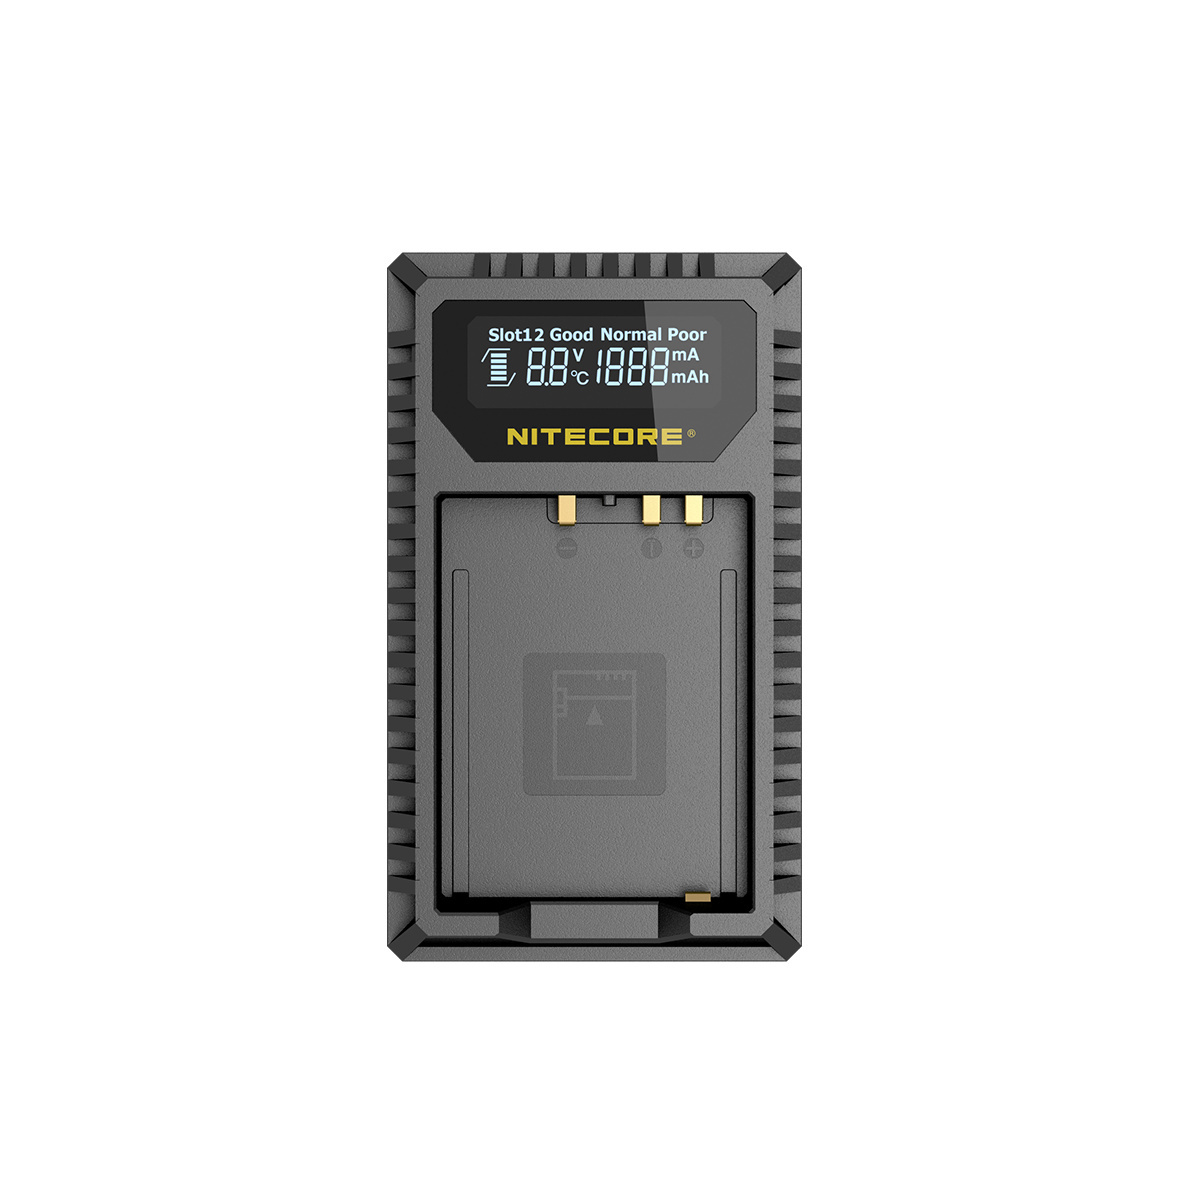 Nitecore FX1 USB Charger for NP-W126/NP-W126S Batteries